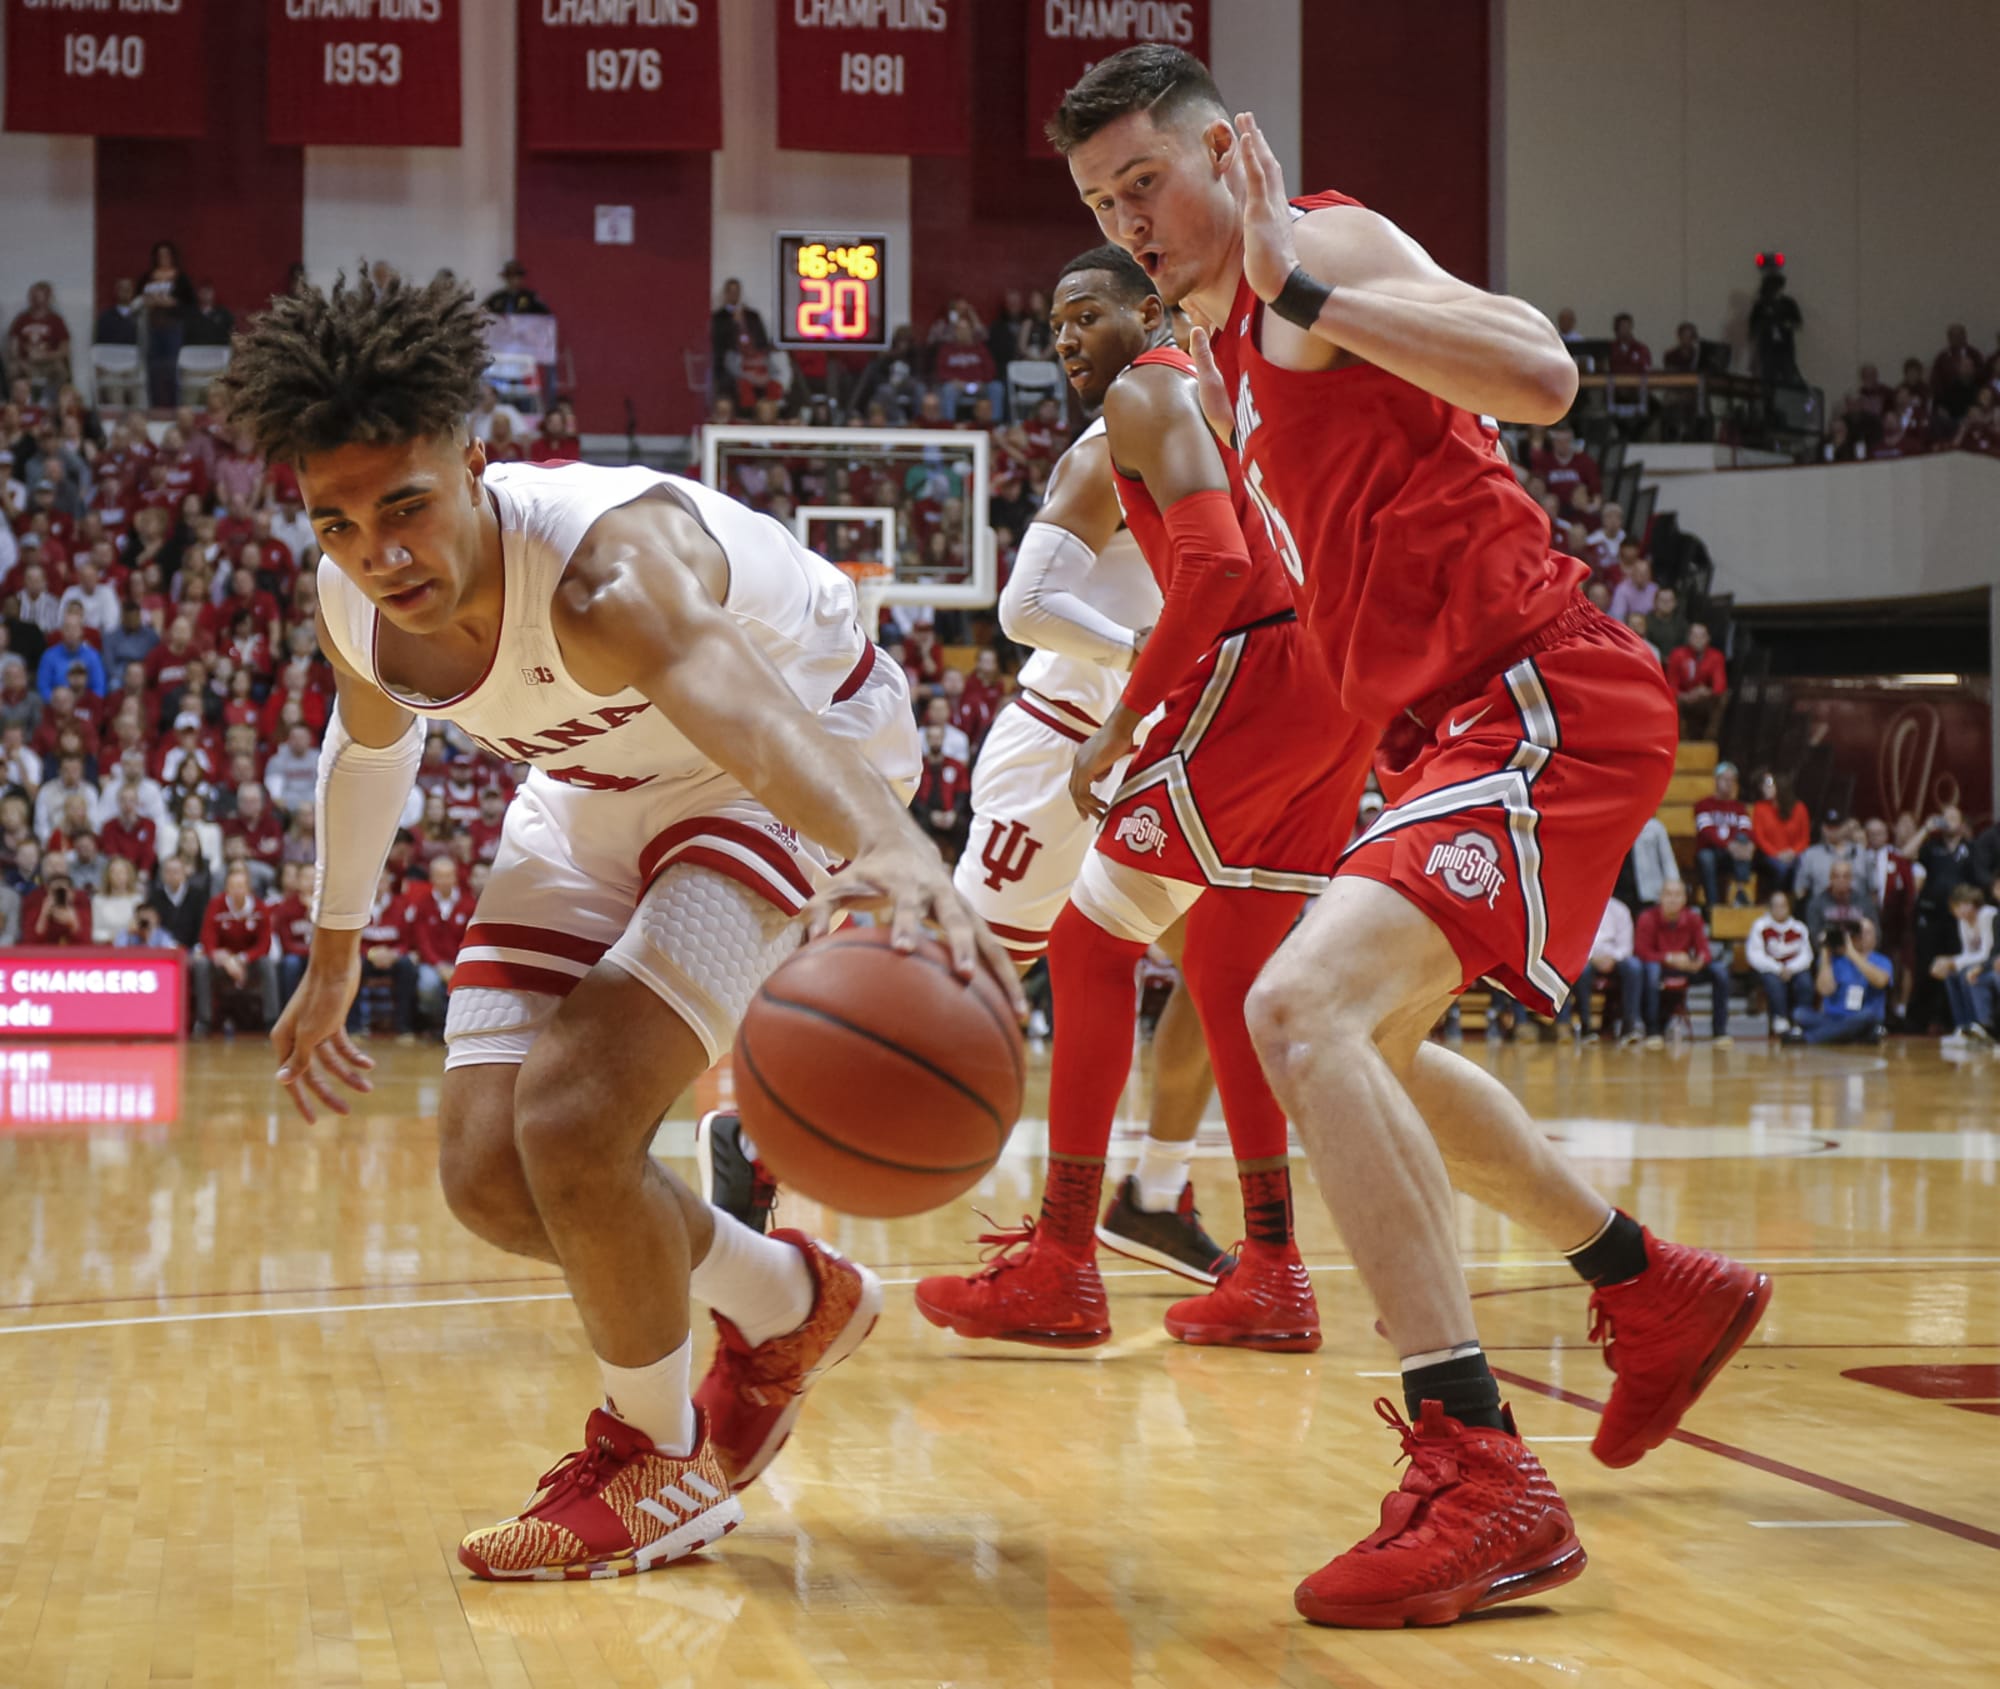 Indiana Basketball Hoosiers Energy Prevails In Big Win Over Ohio State